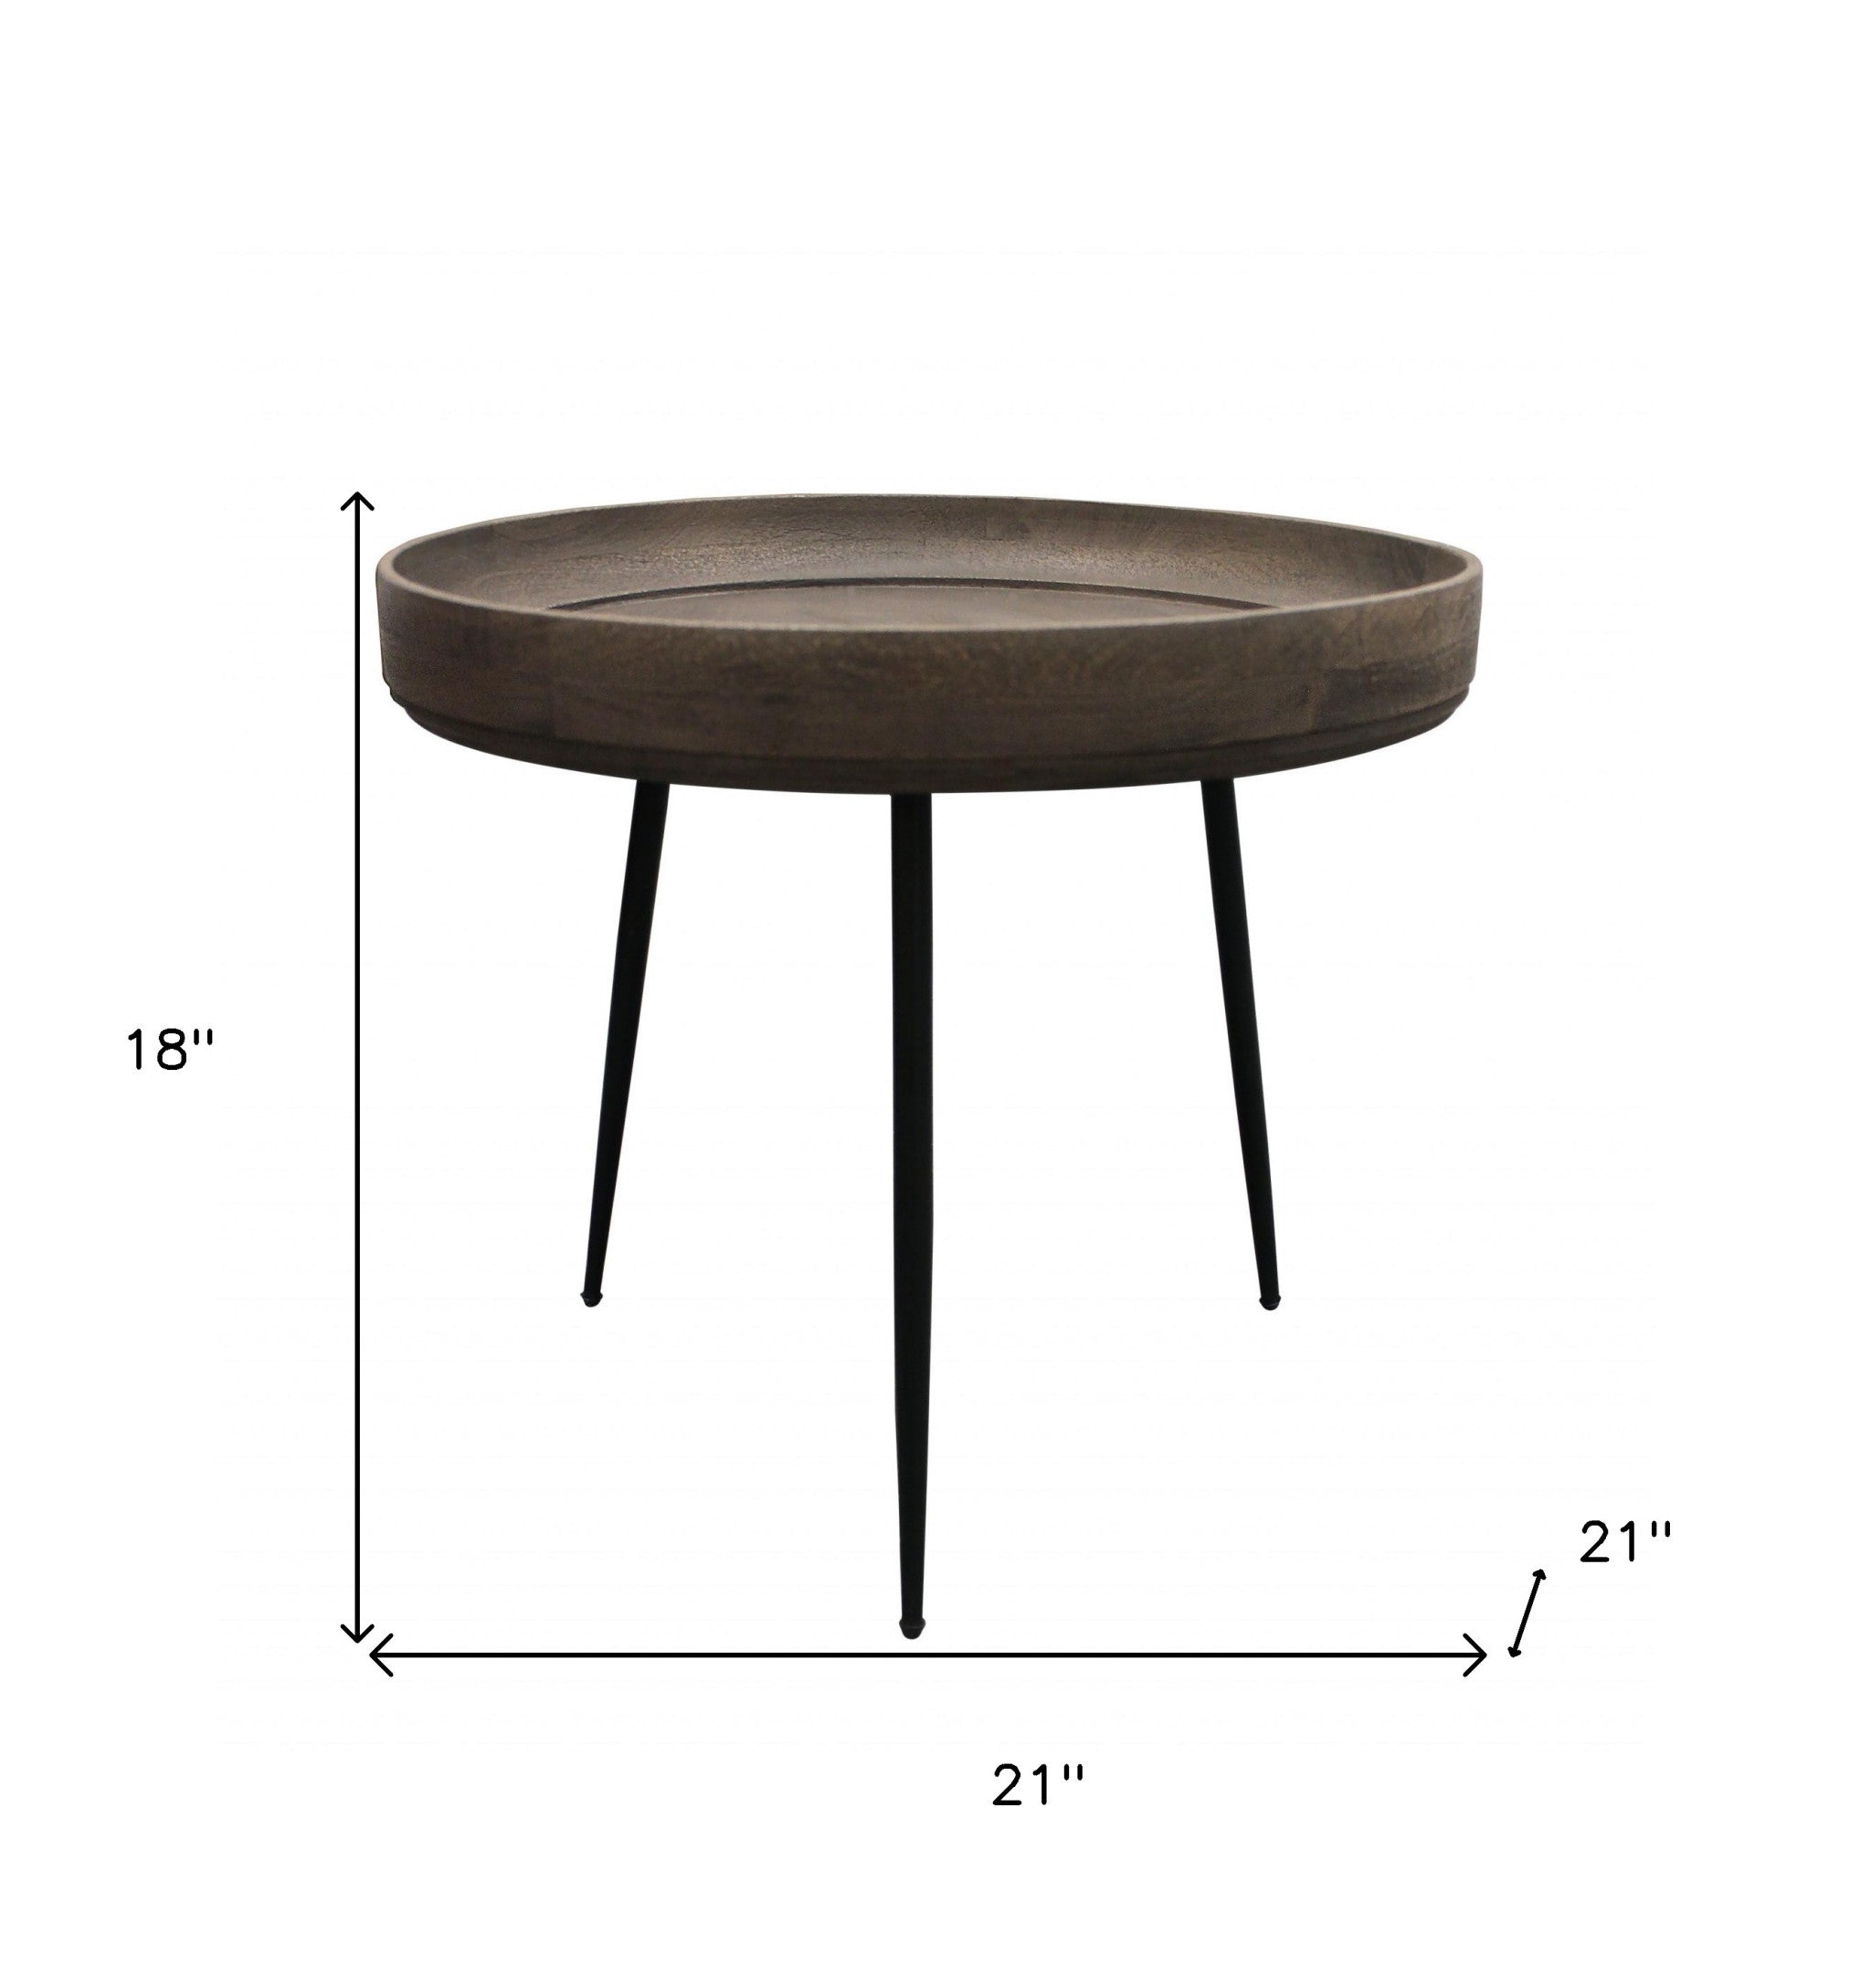 18" Black And Gray Solid Wood And Iron Round End Table